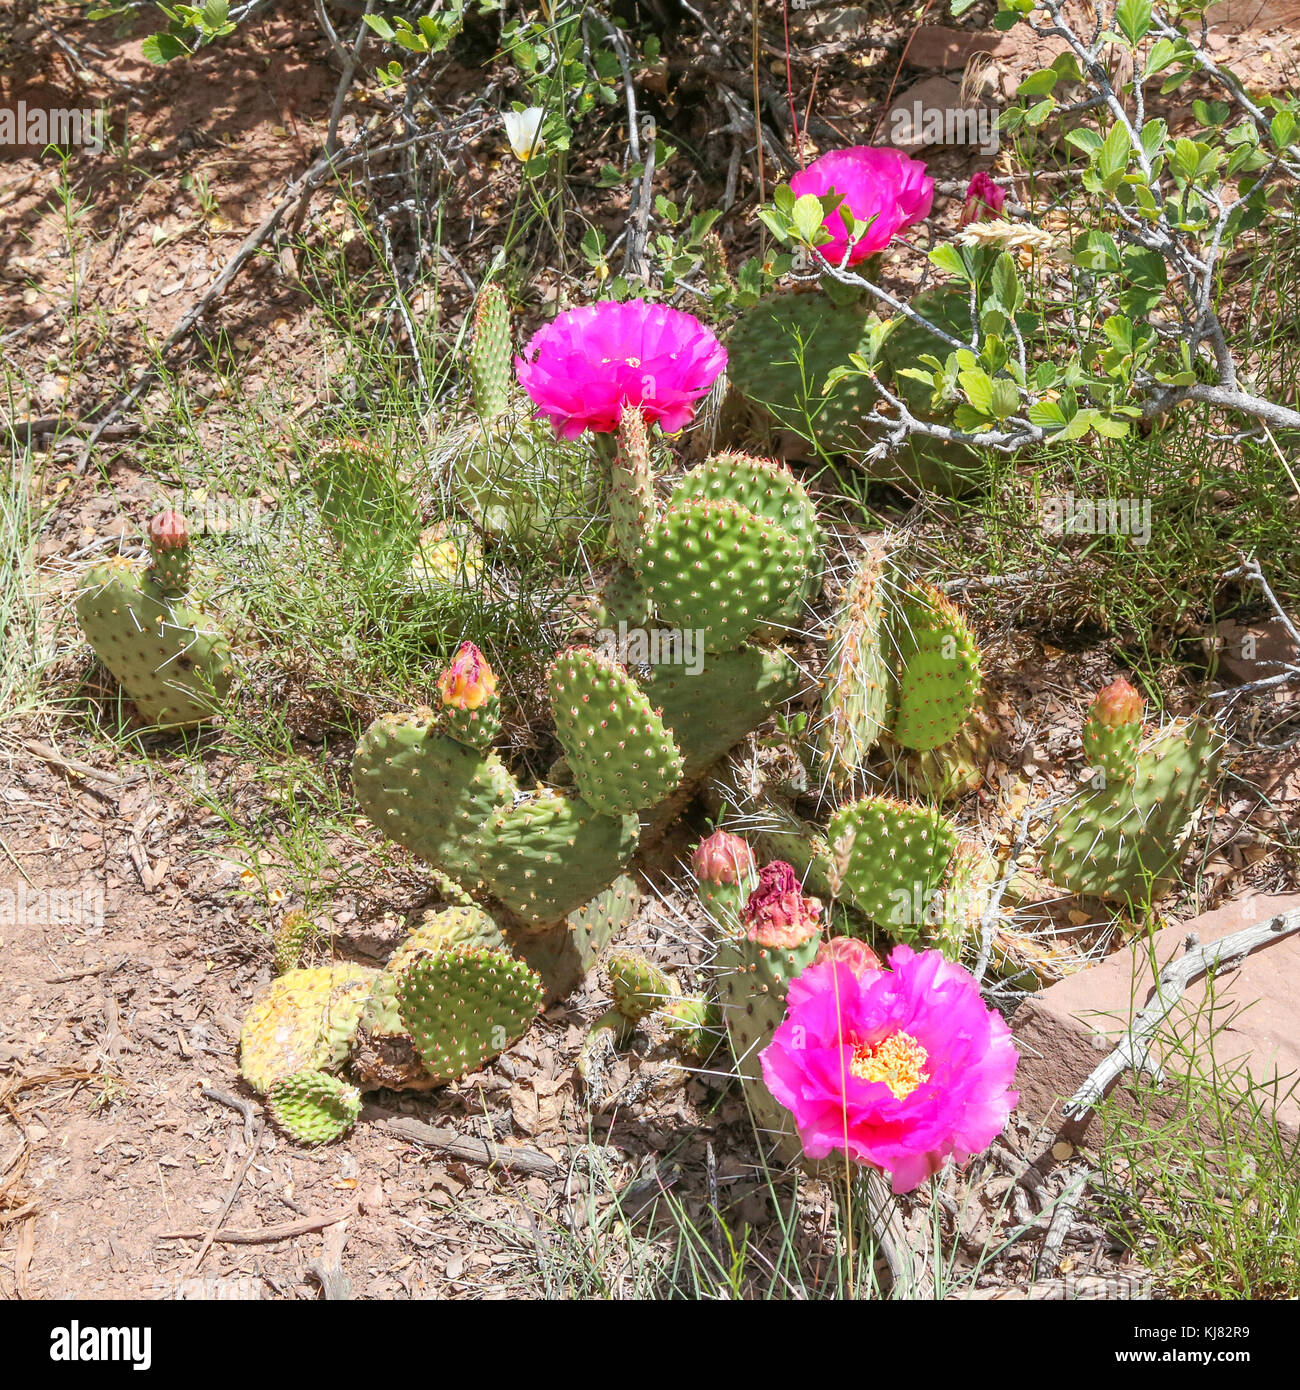 Flowering Beavertail Pricklypear on Timber Creek Overlook Trail, NW side of Zion National Park Stock Photo